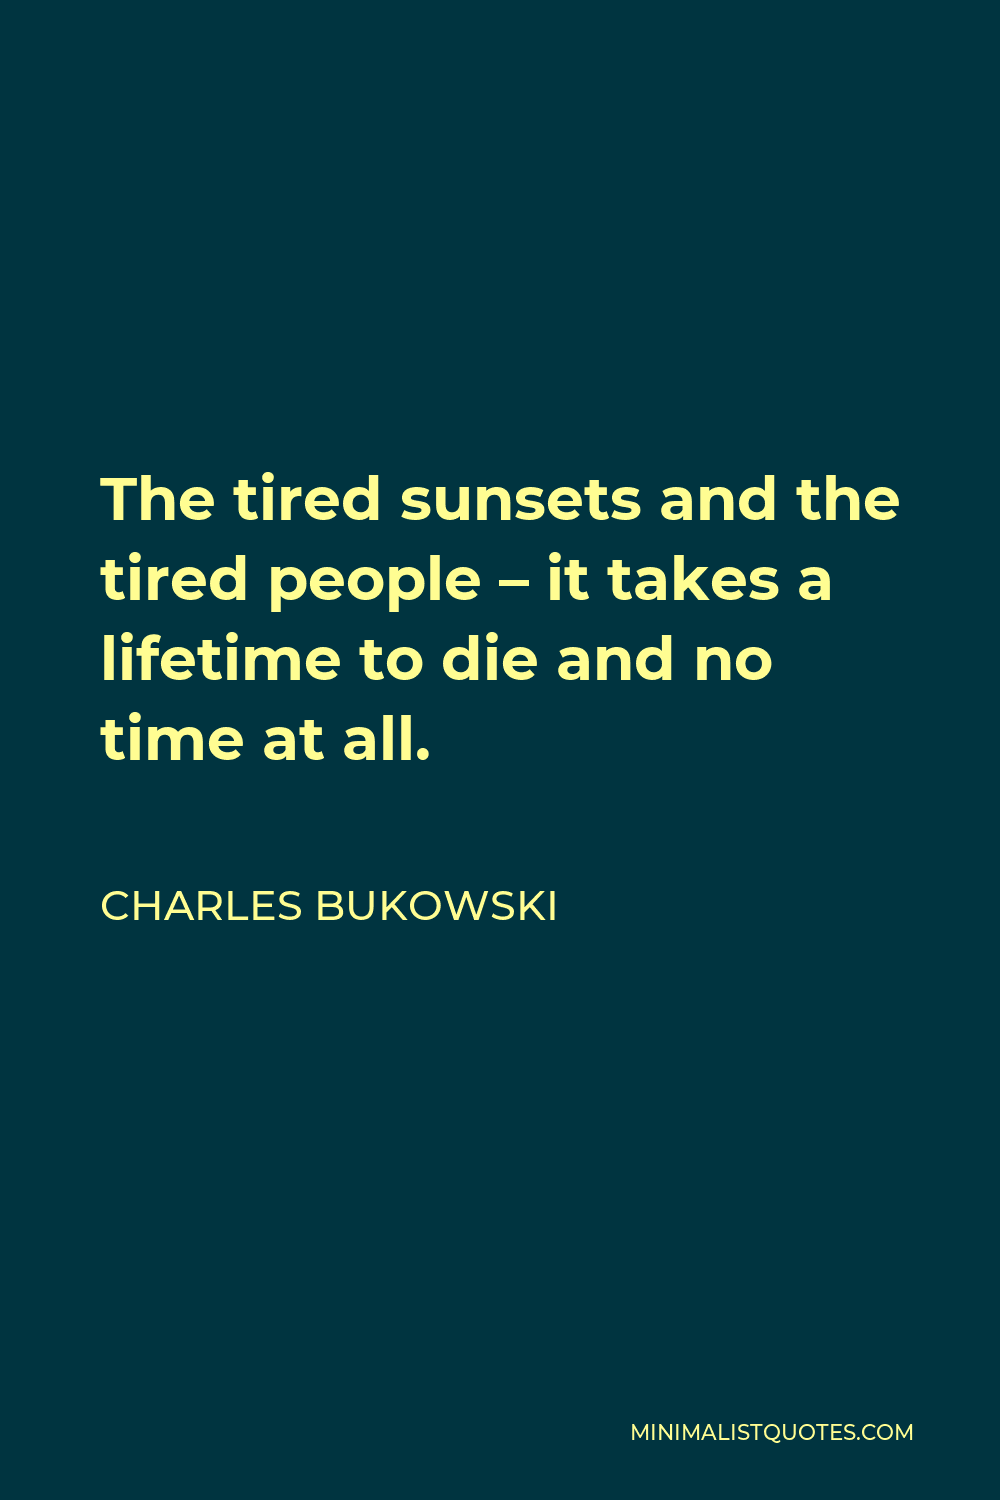 Charles Bukowski Quote - The tired sunsets and the tired people – it takes a lifetime to die and no time at all.